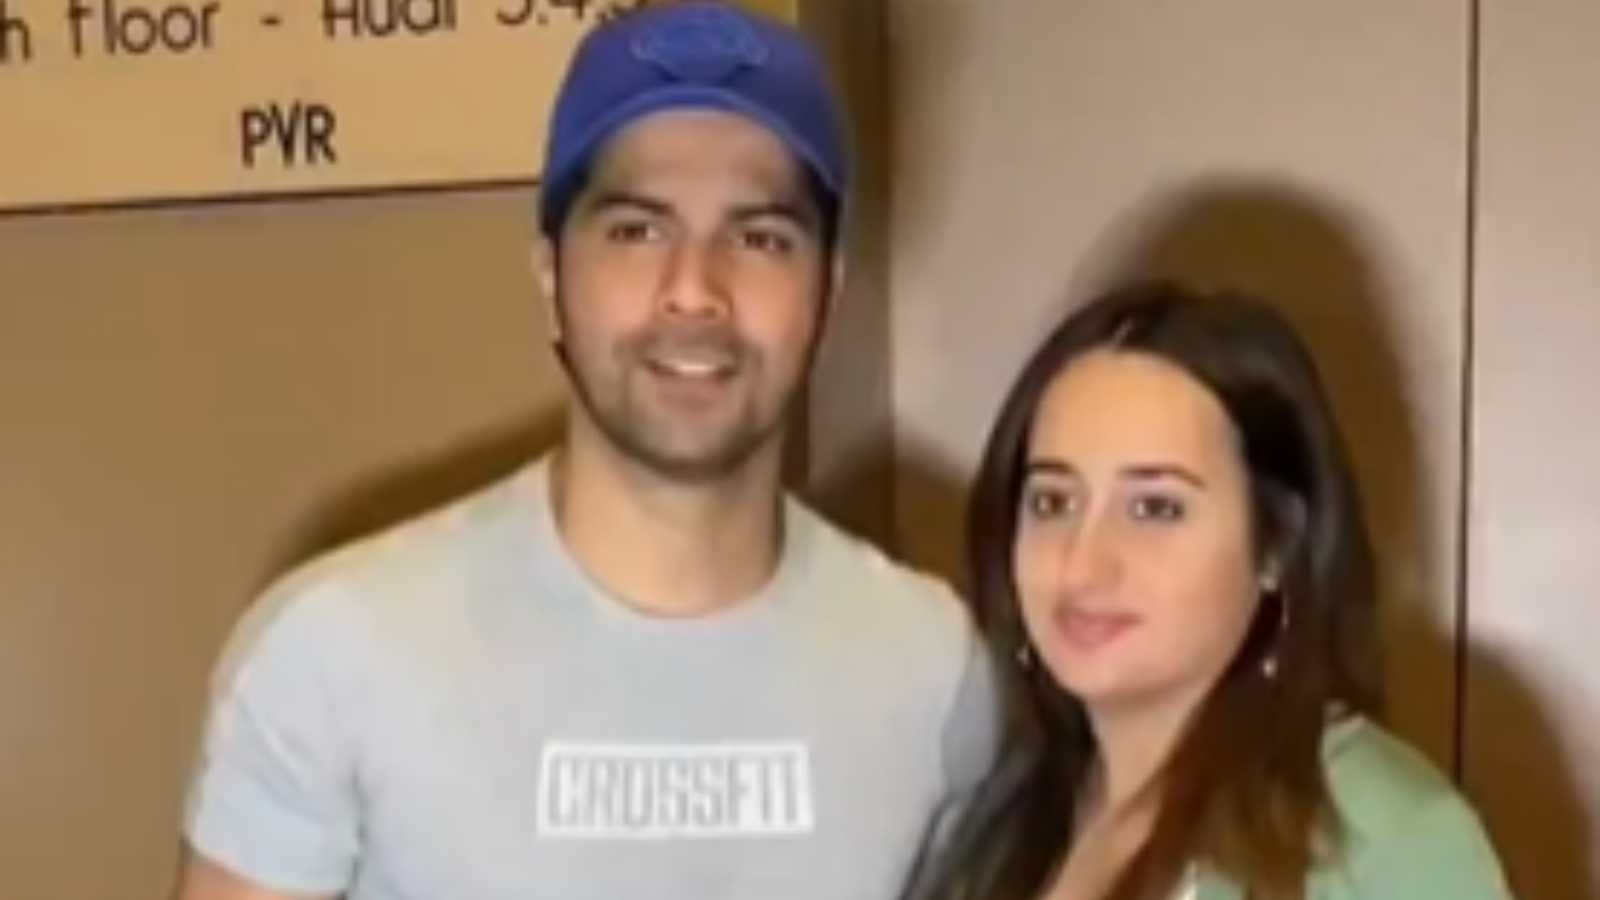 Varun Dhawan plays the doting hubby to Natasha Dalal during their movie date but fans are curious about her pregnancy